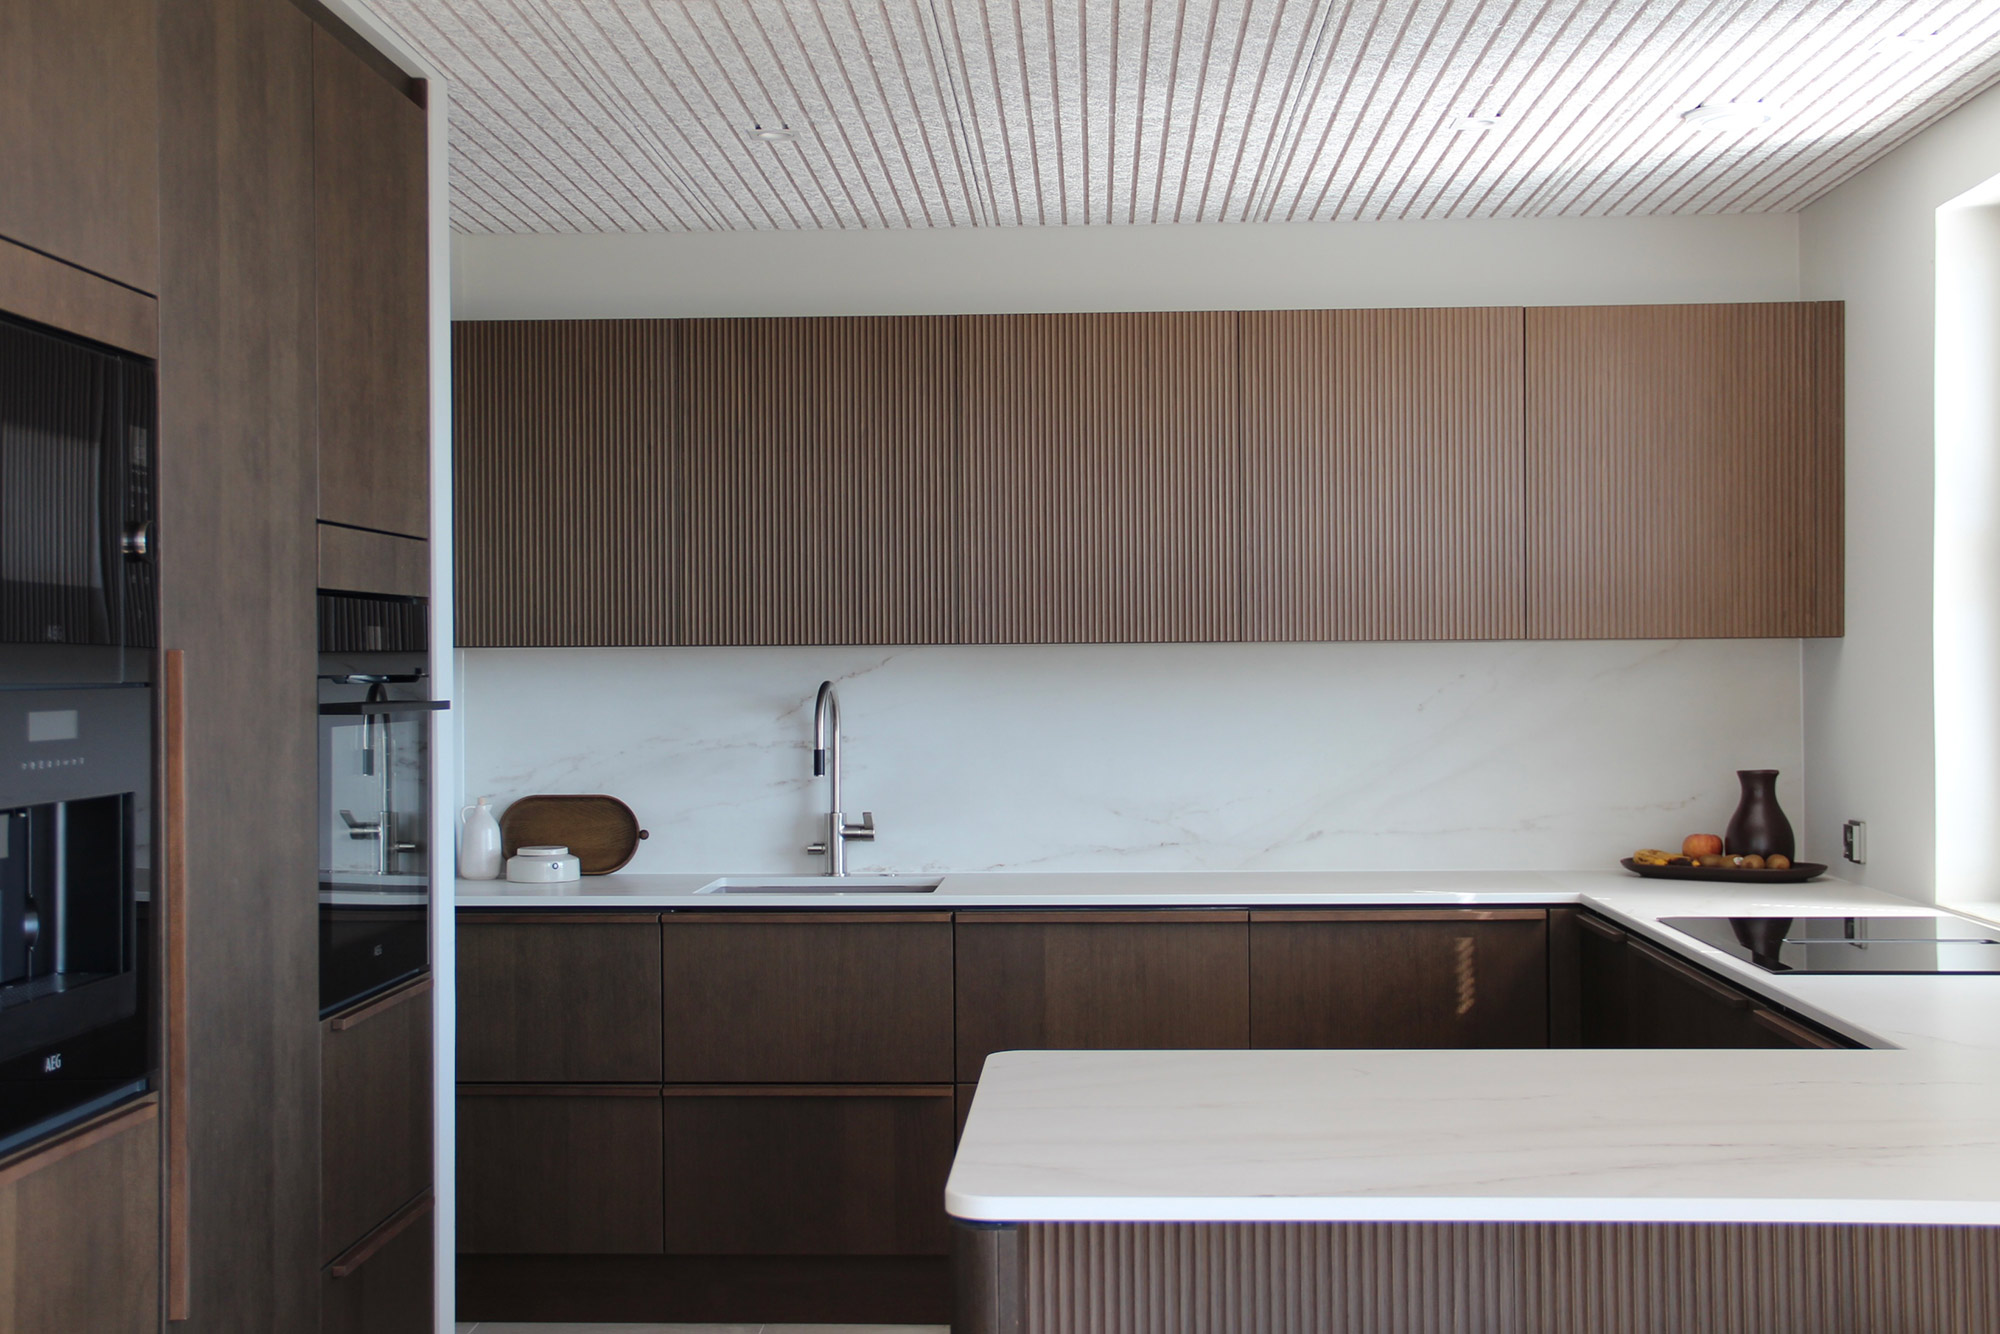 Image of Katja Suominen 1 1 in An ultra-resistant delicate kitchen - Cosentino